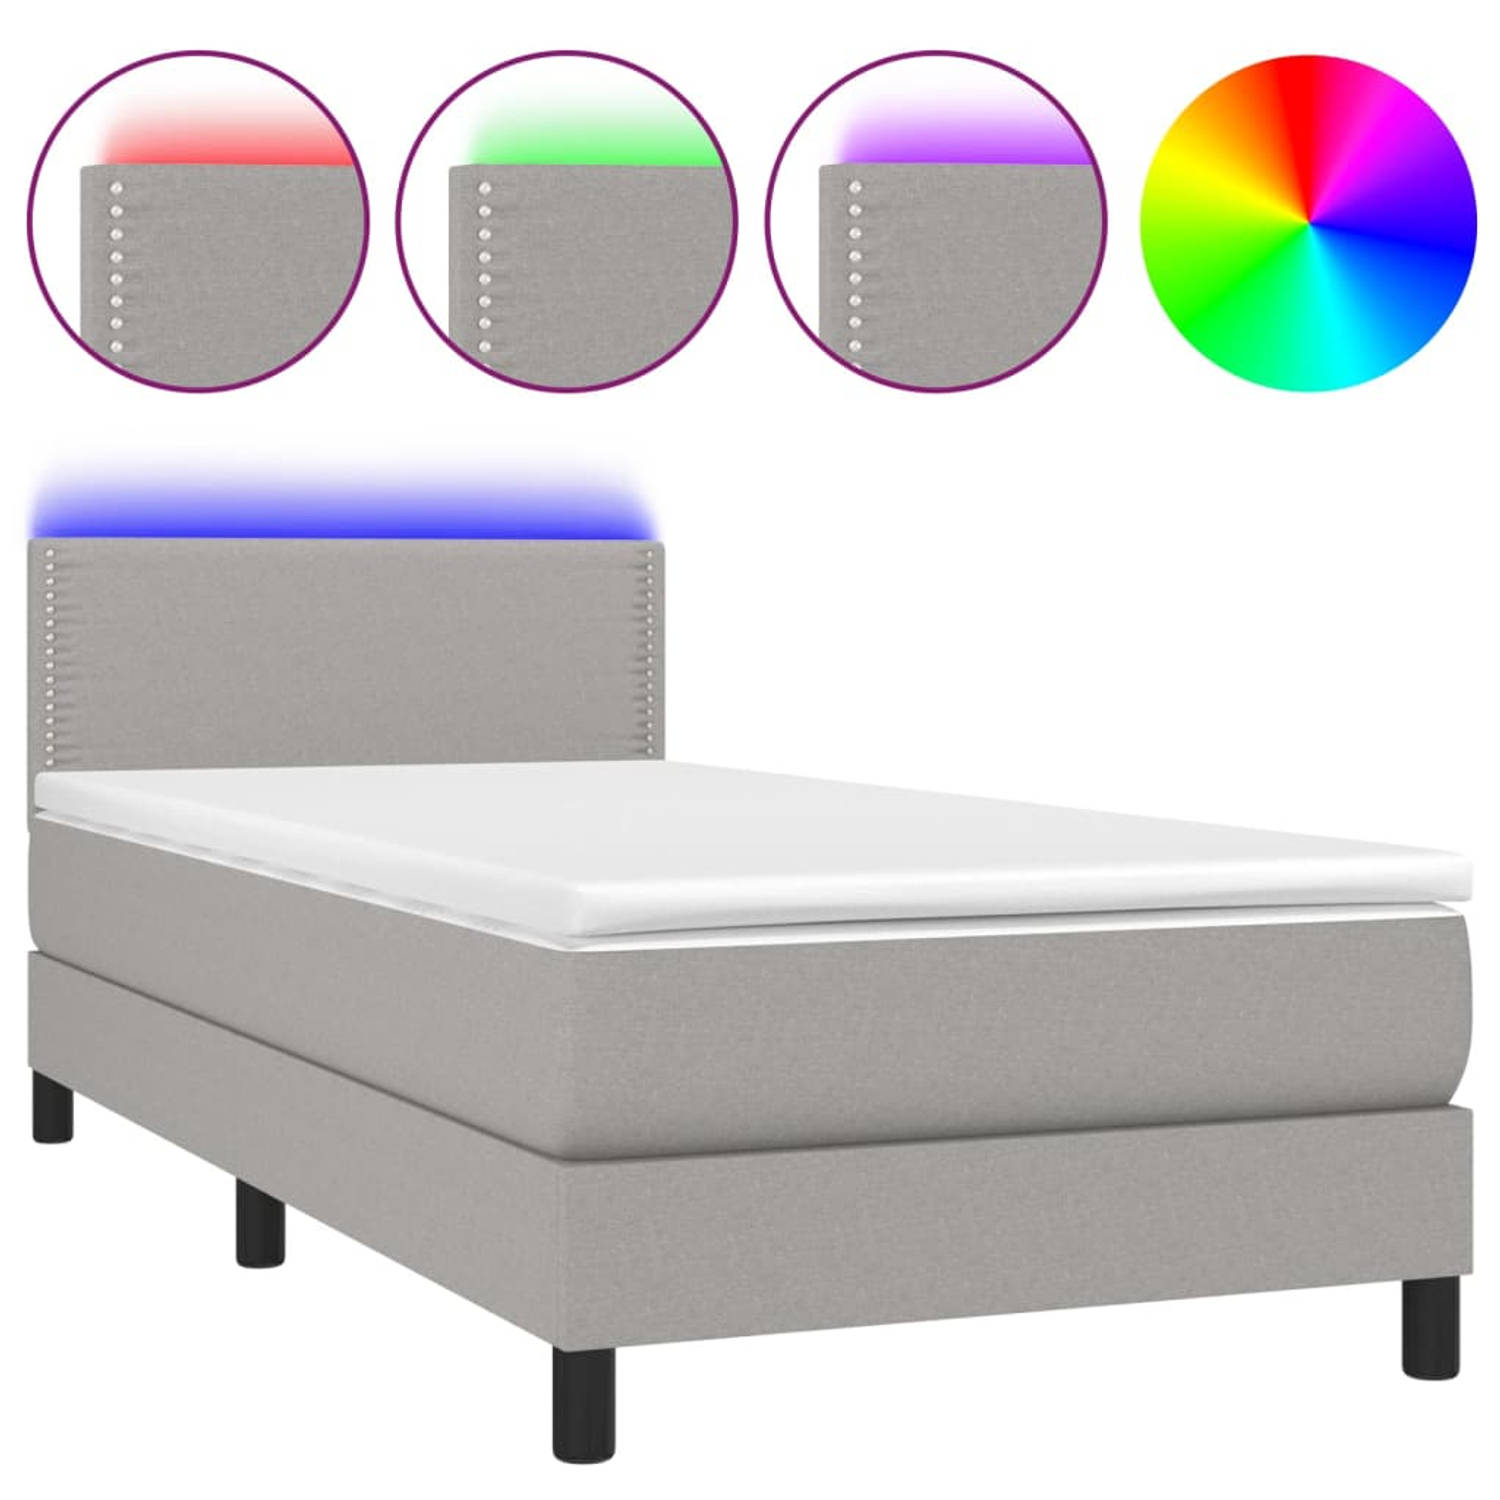 The Living Store Boxspring met matras en LED stof lichtgrijs 90x190 cm - Boxspring - Boxsprings - Bed - Slaapmeubel - Boxspringbed - Boxspring Bed - Tweepersoonsbed - Bed Met Matra